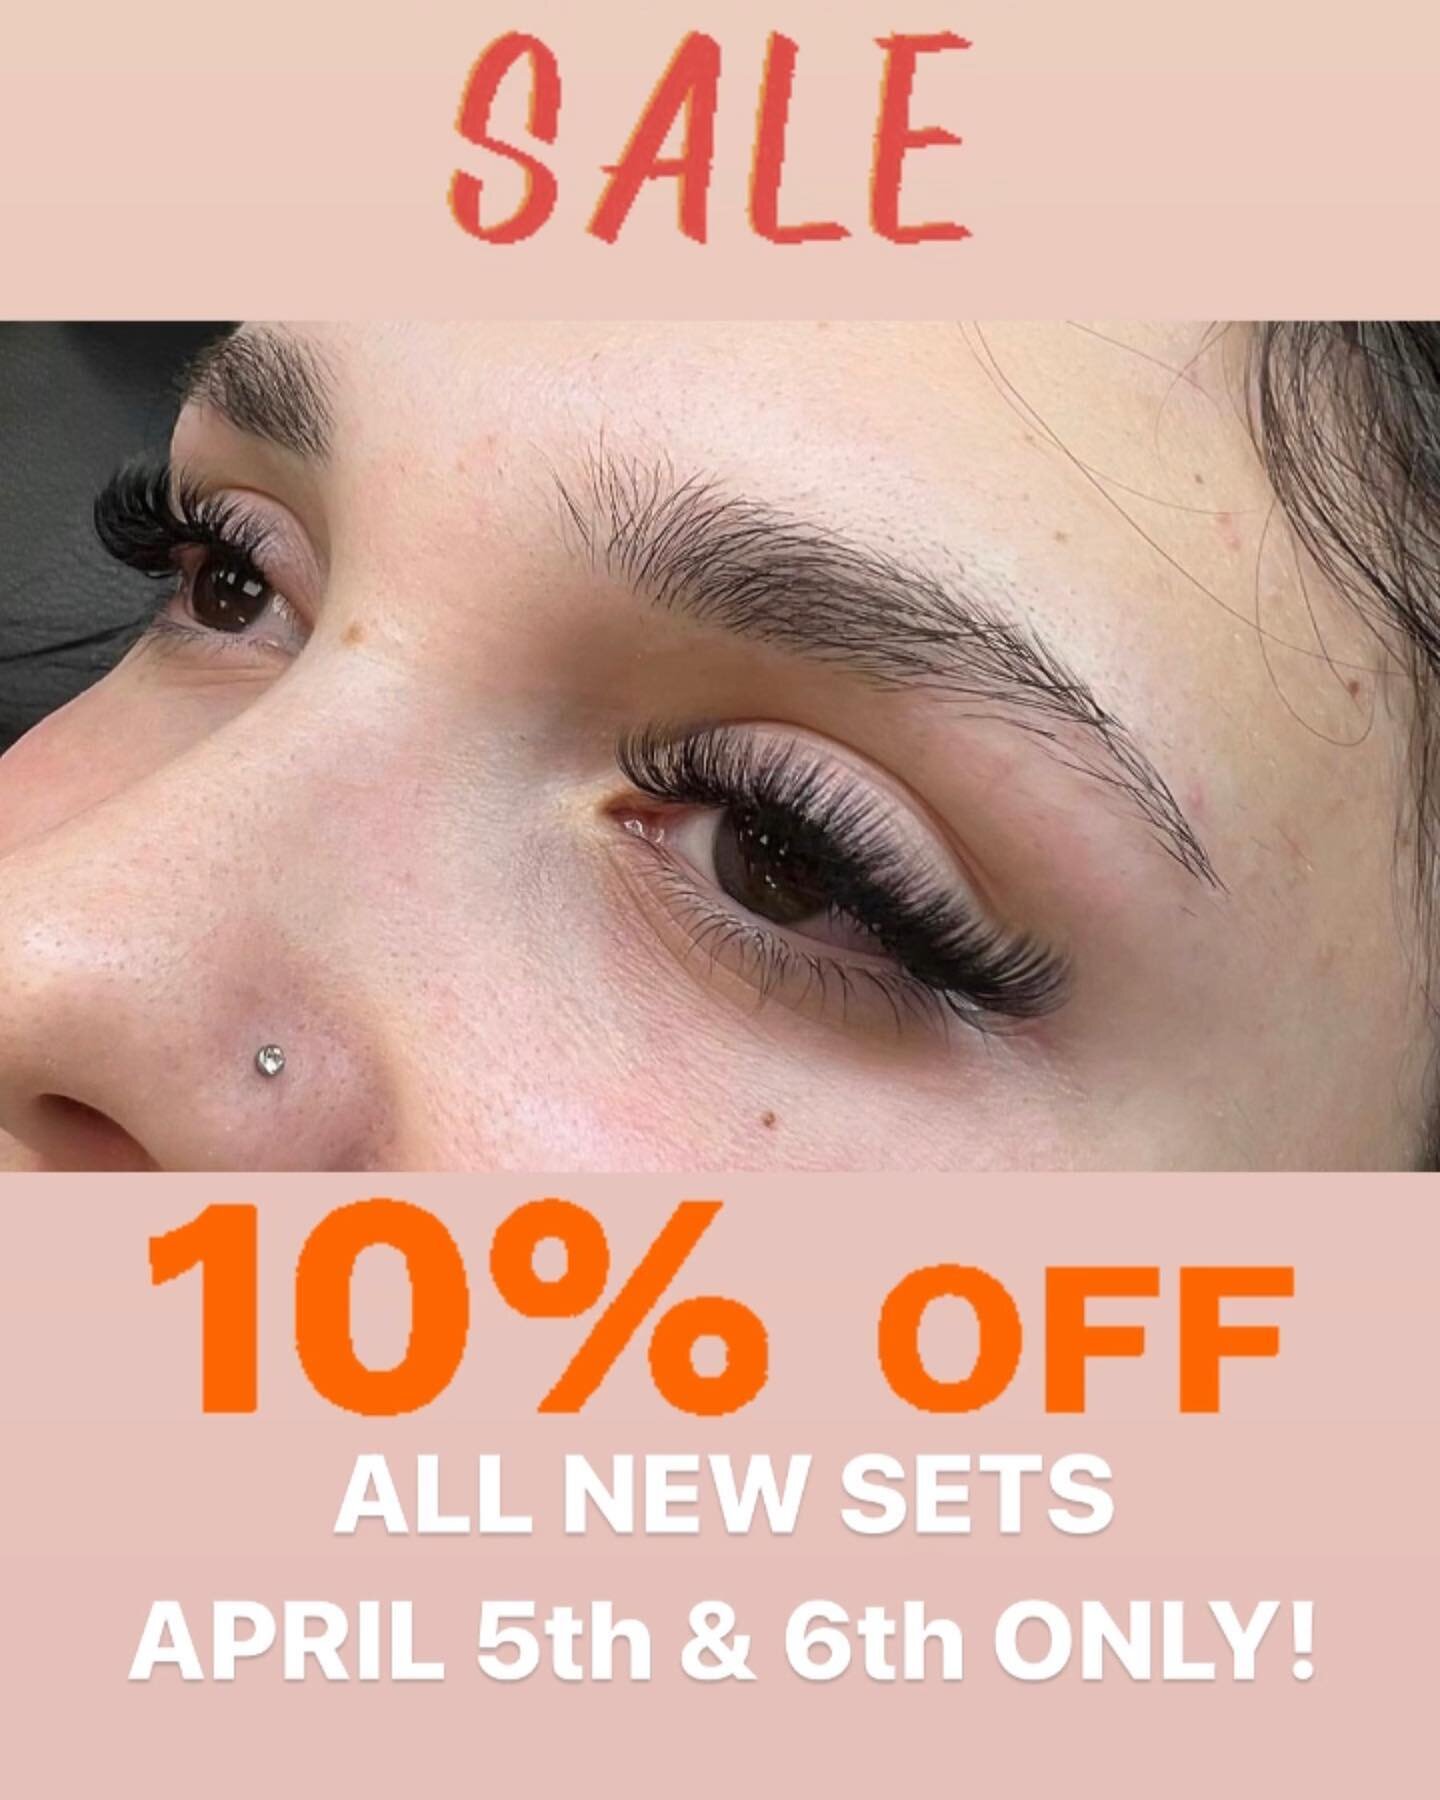 Flash Sale! Book an appointment for a new set April 5 or 6 and receive 10% off!!
#flashsale #lash #lashextensions #niagaralashes #sale #niagarafalls #niagararegion #classiclashes #hybridlashes #volumelashes